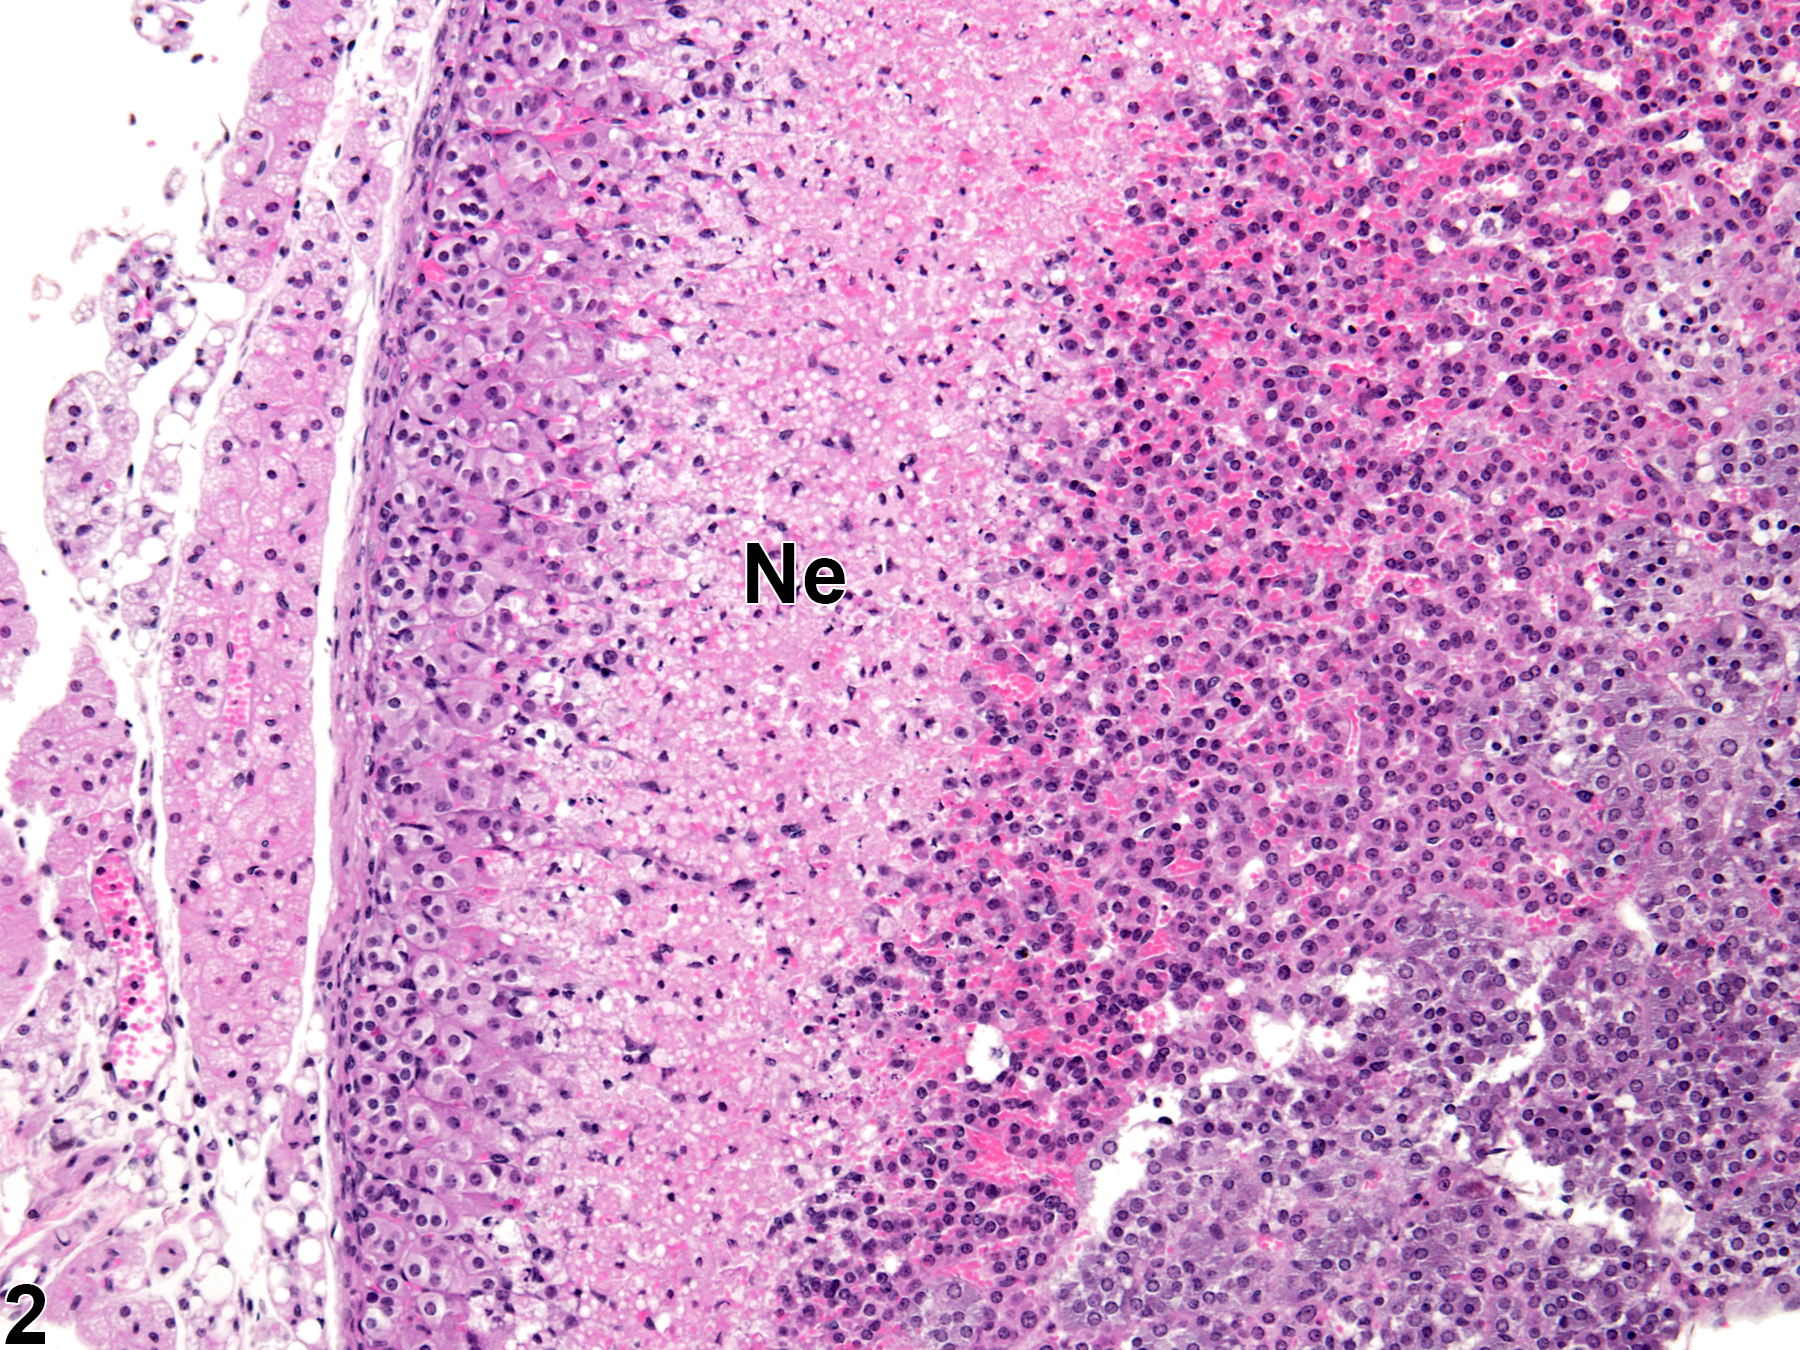 Image of necrosis in the adrenal gland cortex from a female B6C3F1/N mouse in a subchronic study